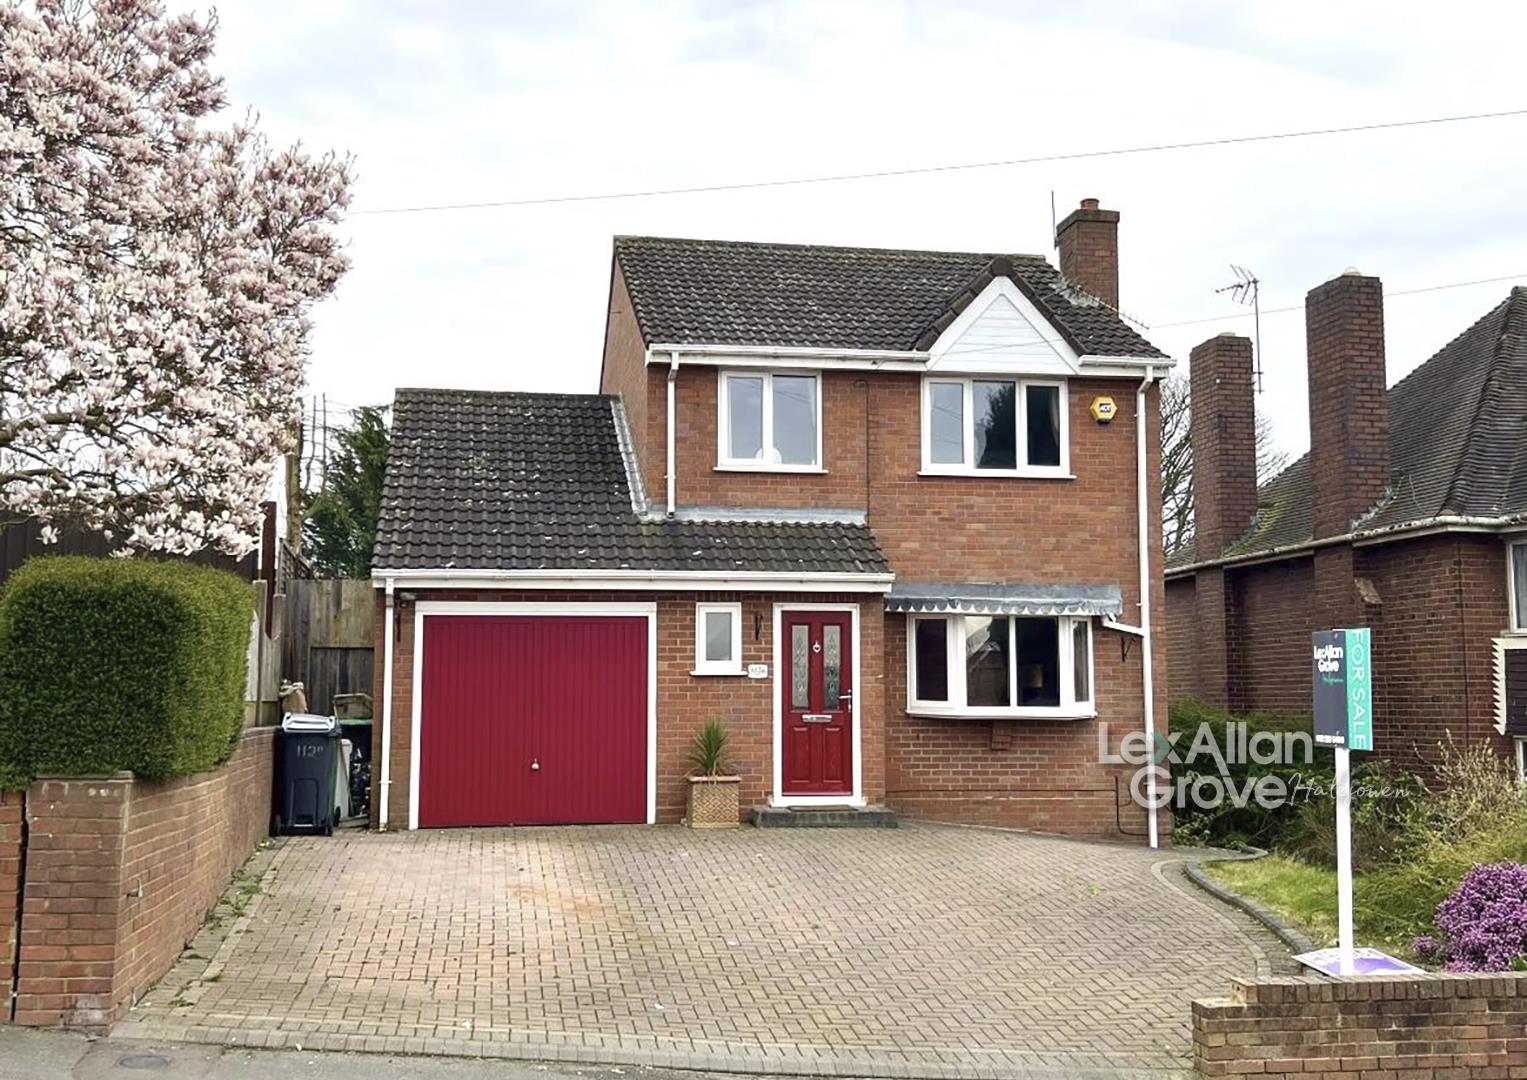 3 bed detached house for sale in Ross, Rowley Regis - Property Image 1